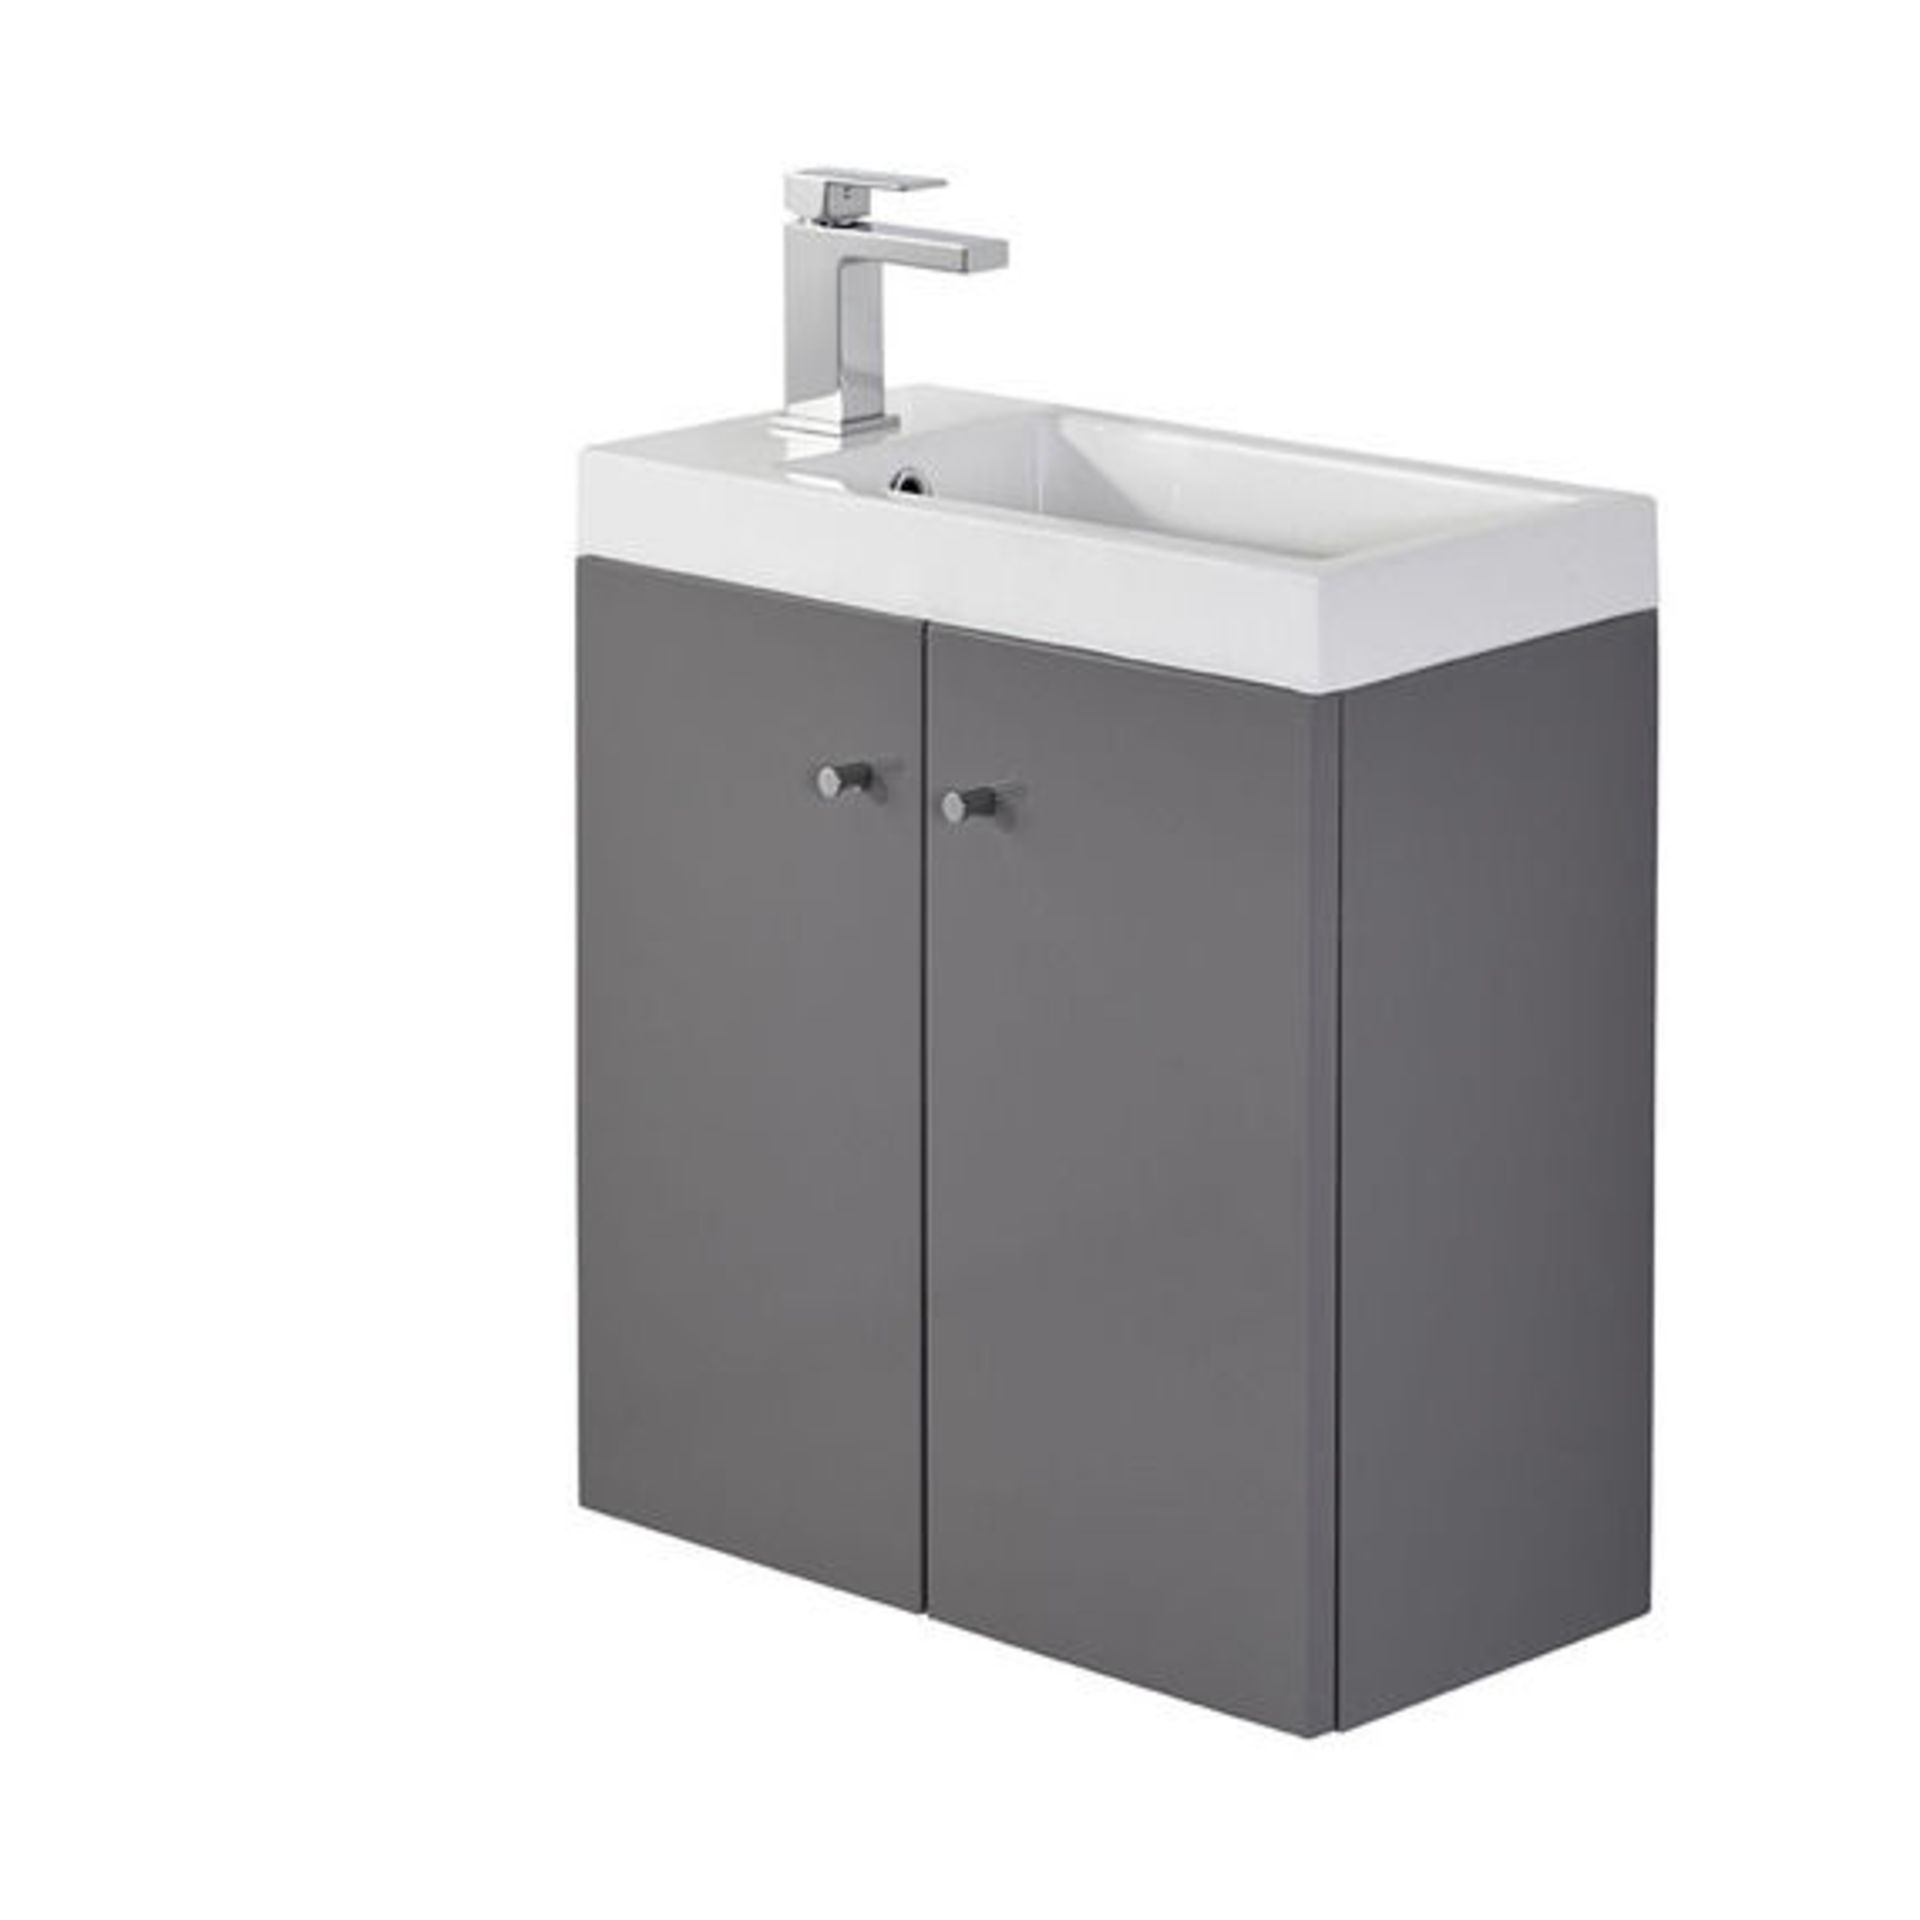 10 x Alpine Duo 495 Wall Hung Vanity Unit - Gloss Grey  - Brand New Boxed Stock - Dimensions: W49. - Image 3 of 5